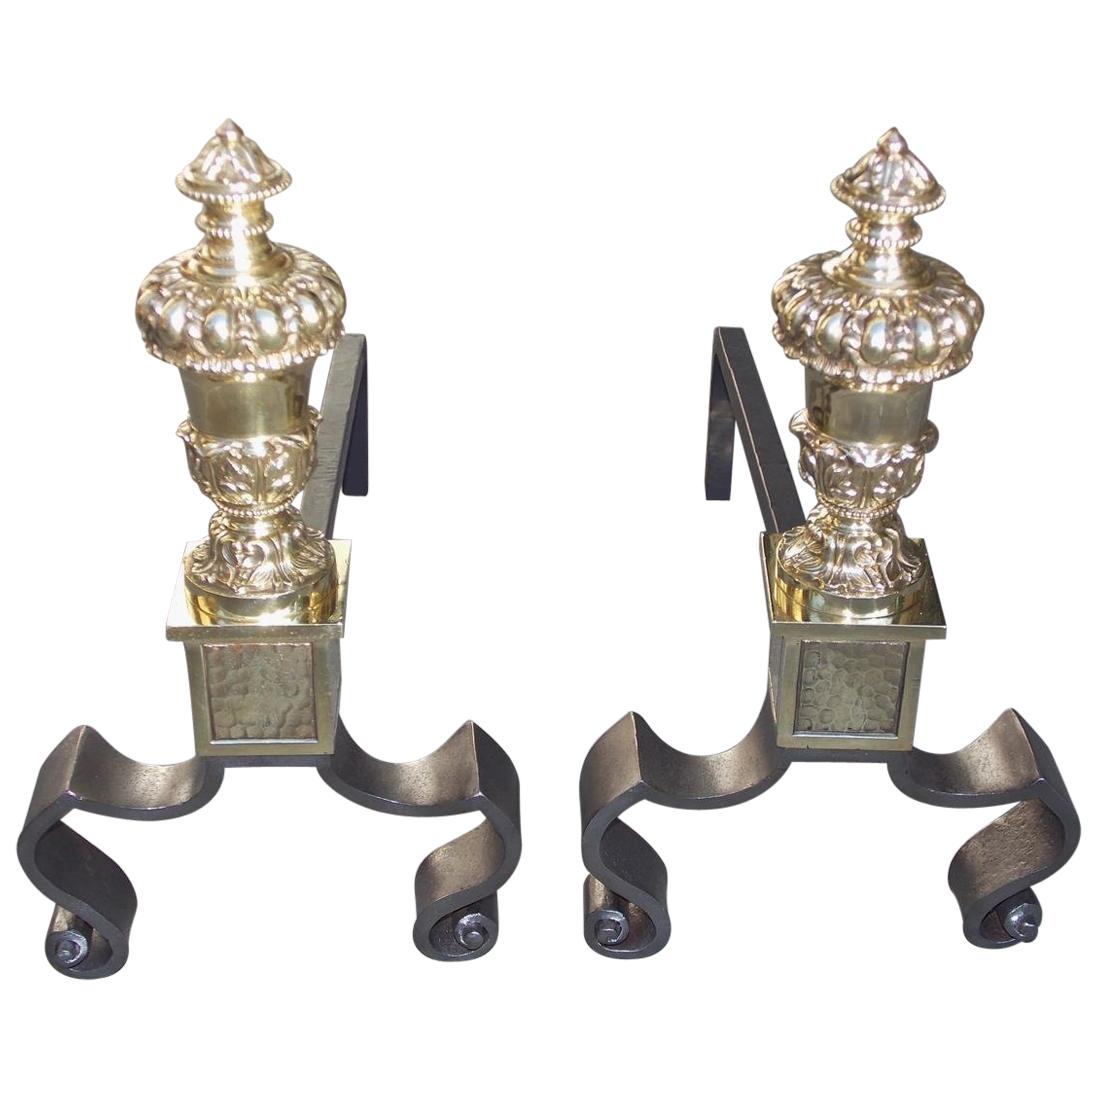 Pair of French Brass and Polished Steel Urn Finial Acanthus Andirons, Circa 1850